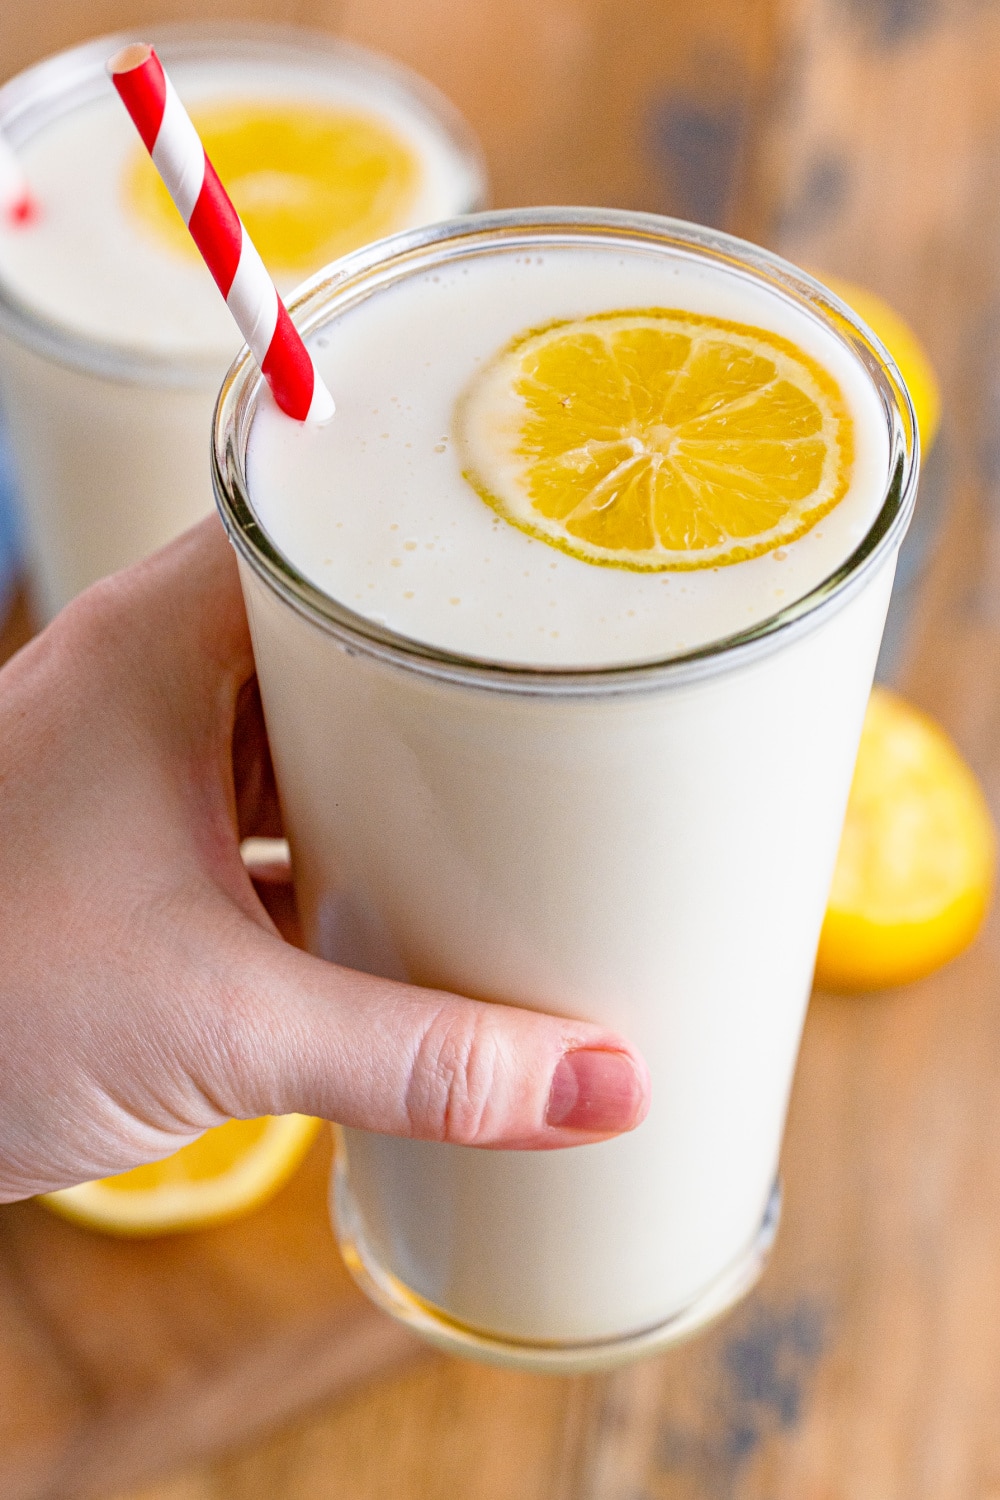 A woman's hand holding a glass of frosted lemonade.